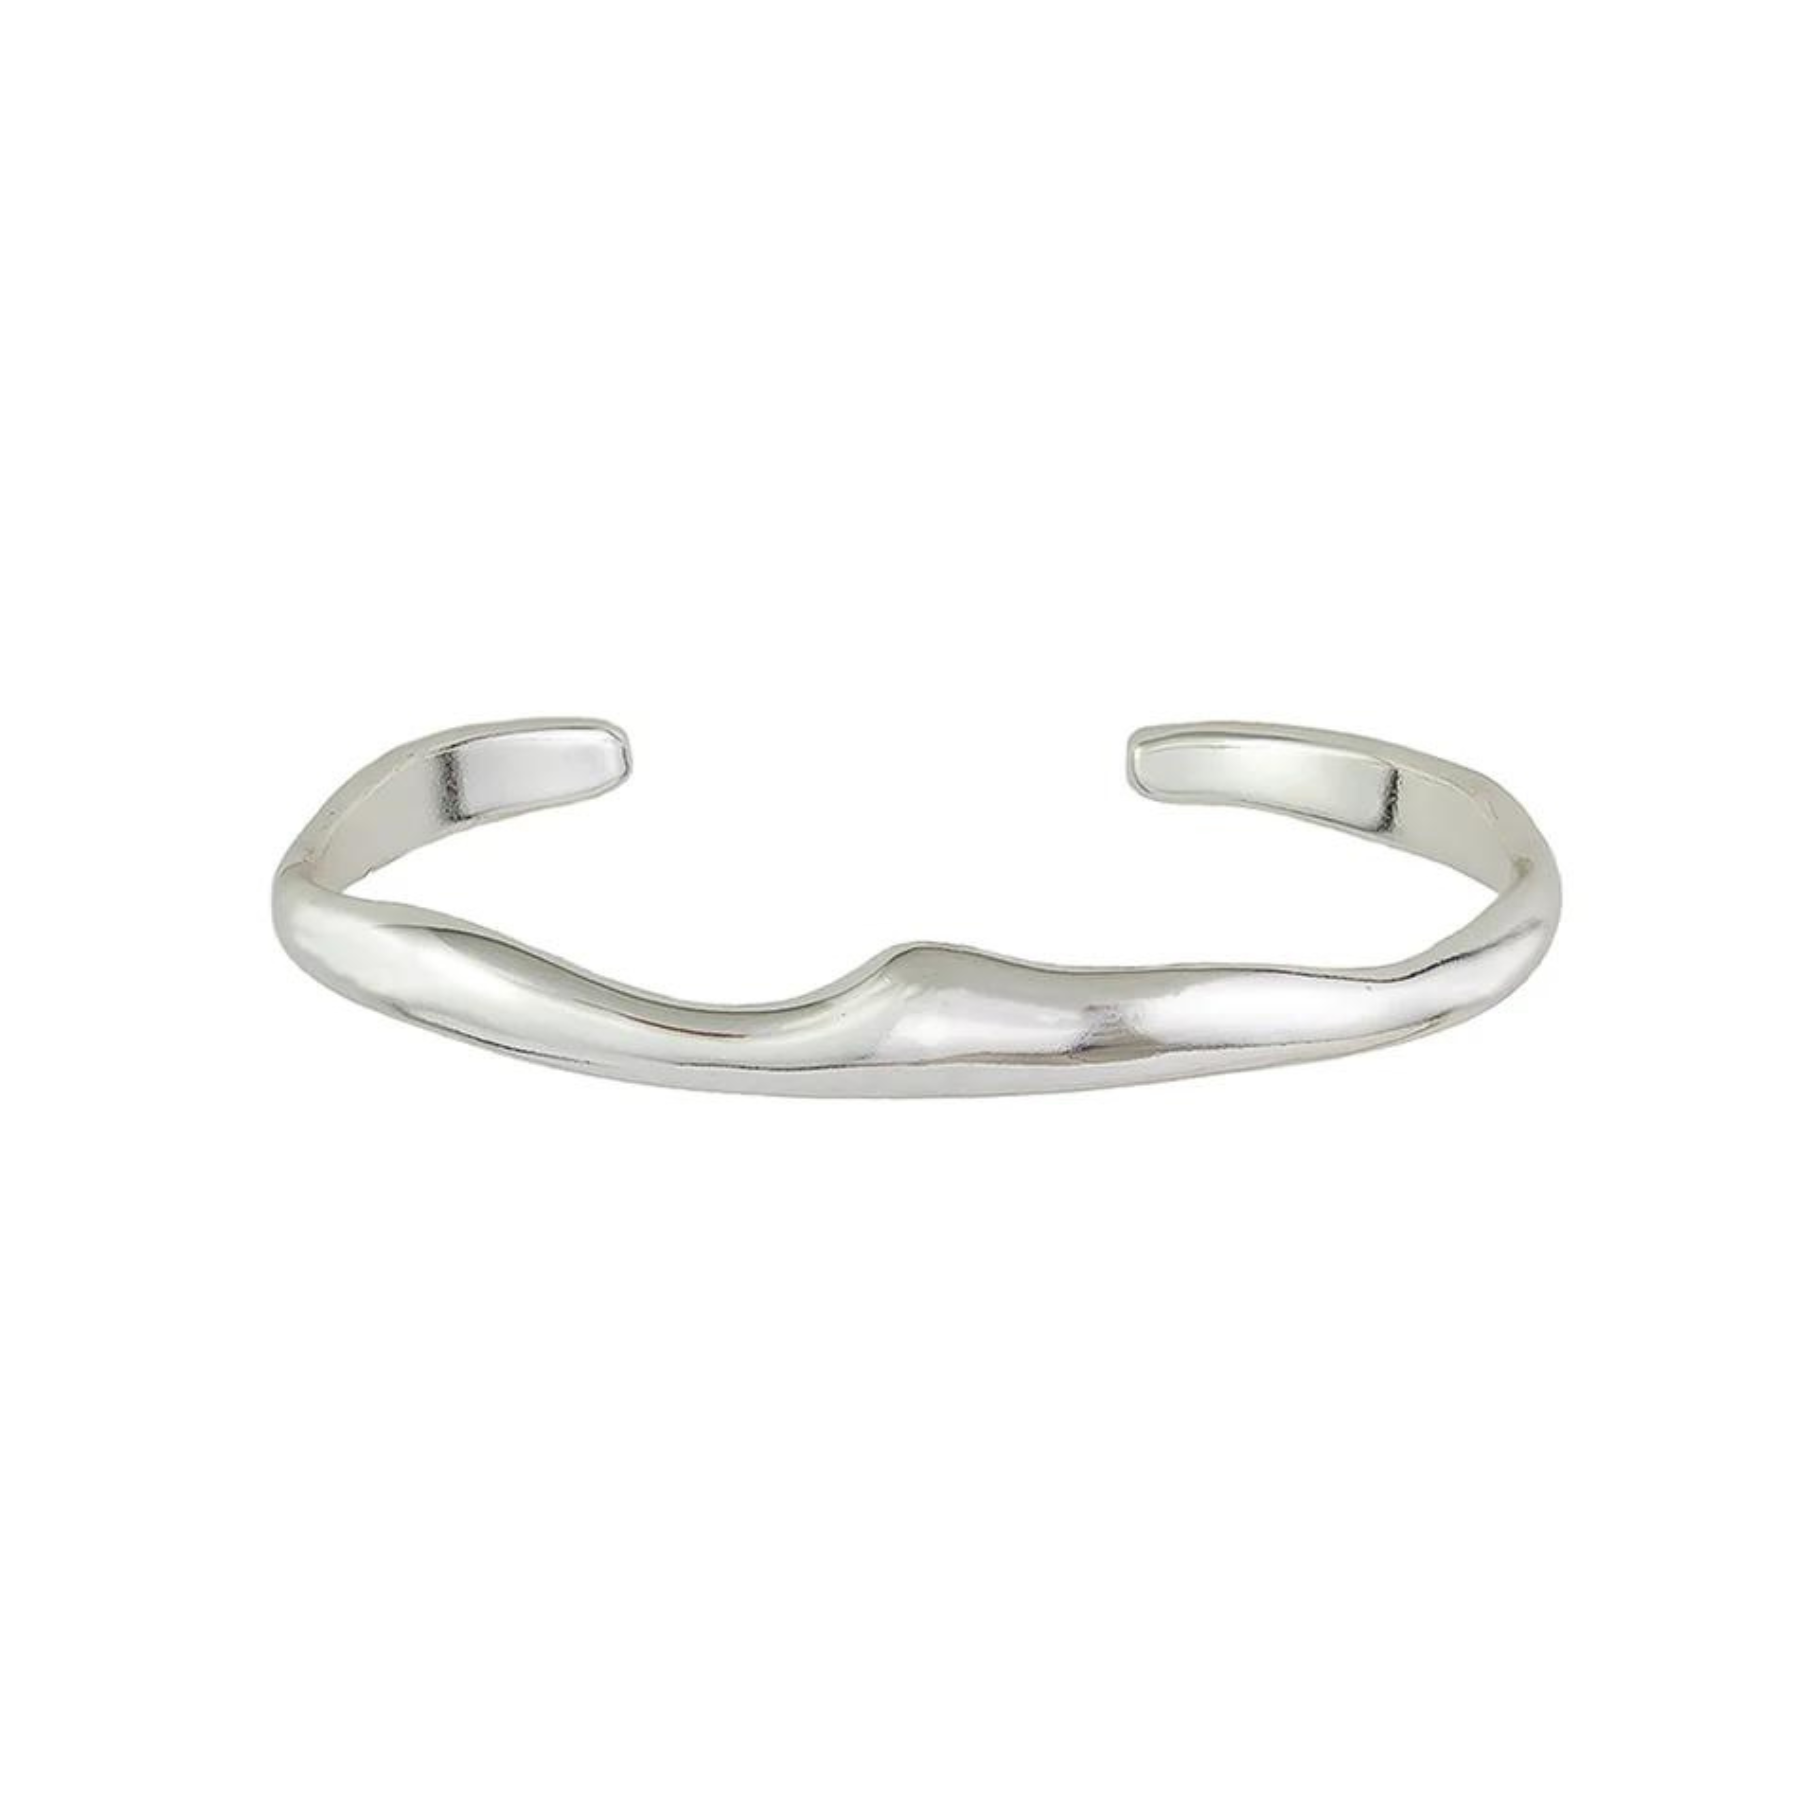 Jolie and Deen Tania Cuff in silver